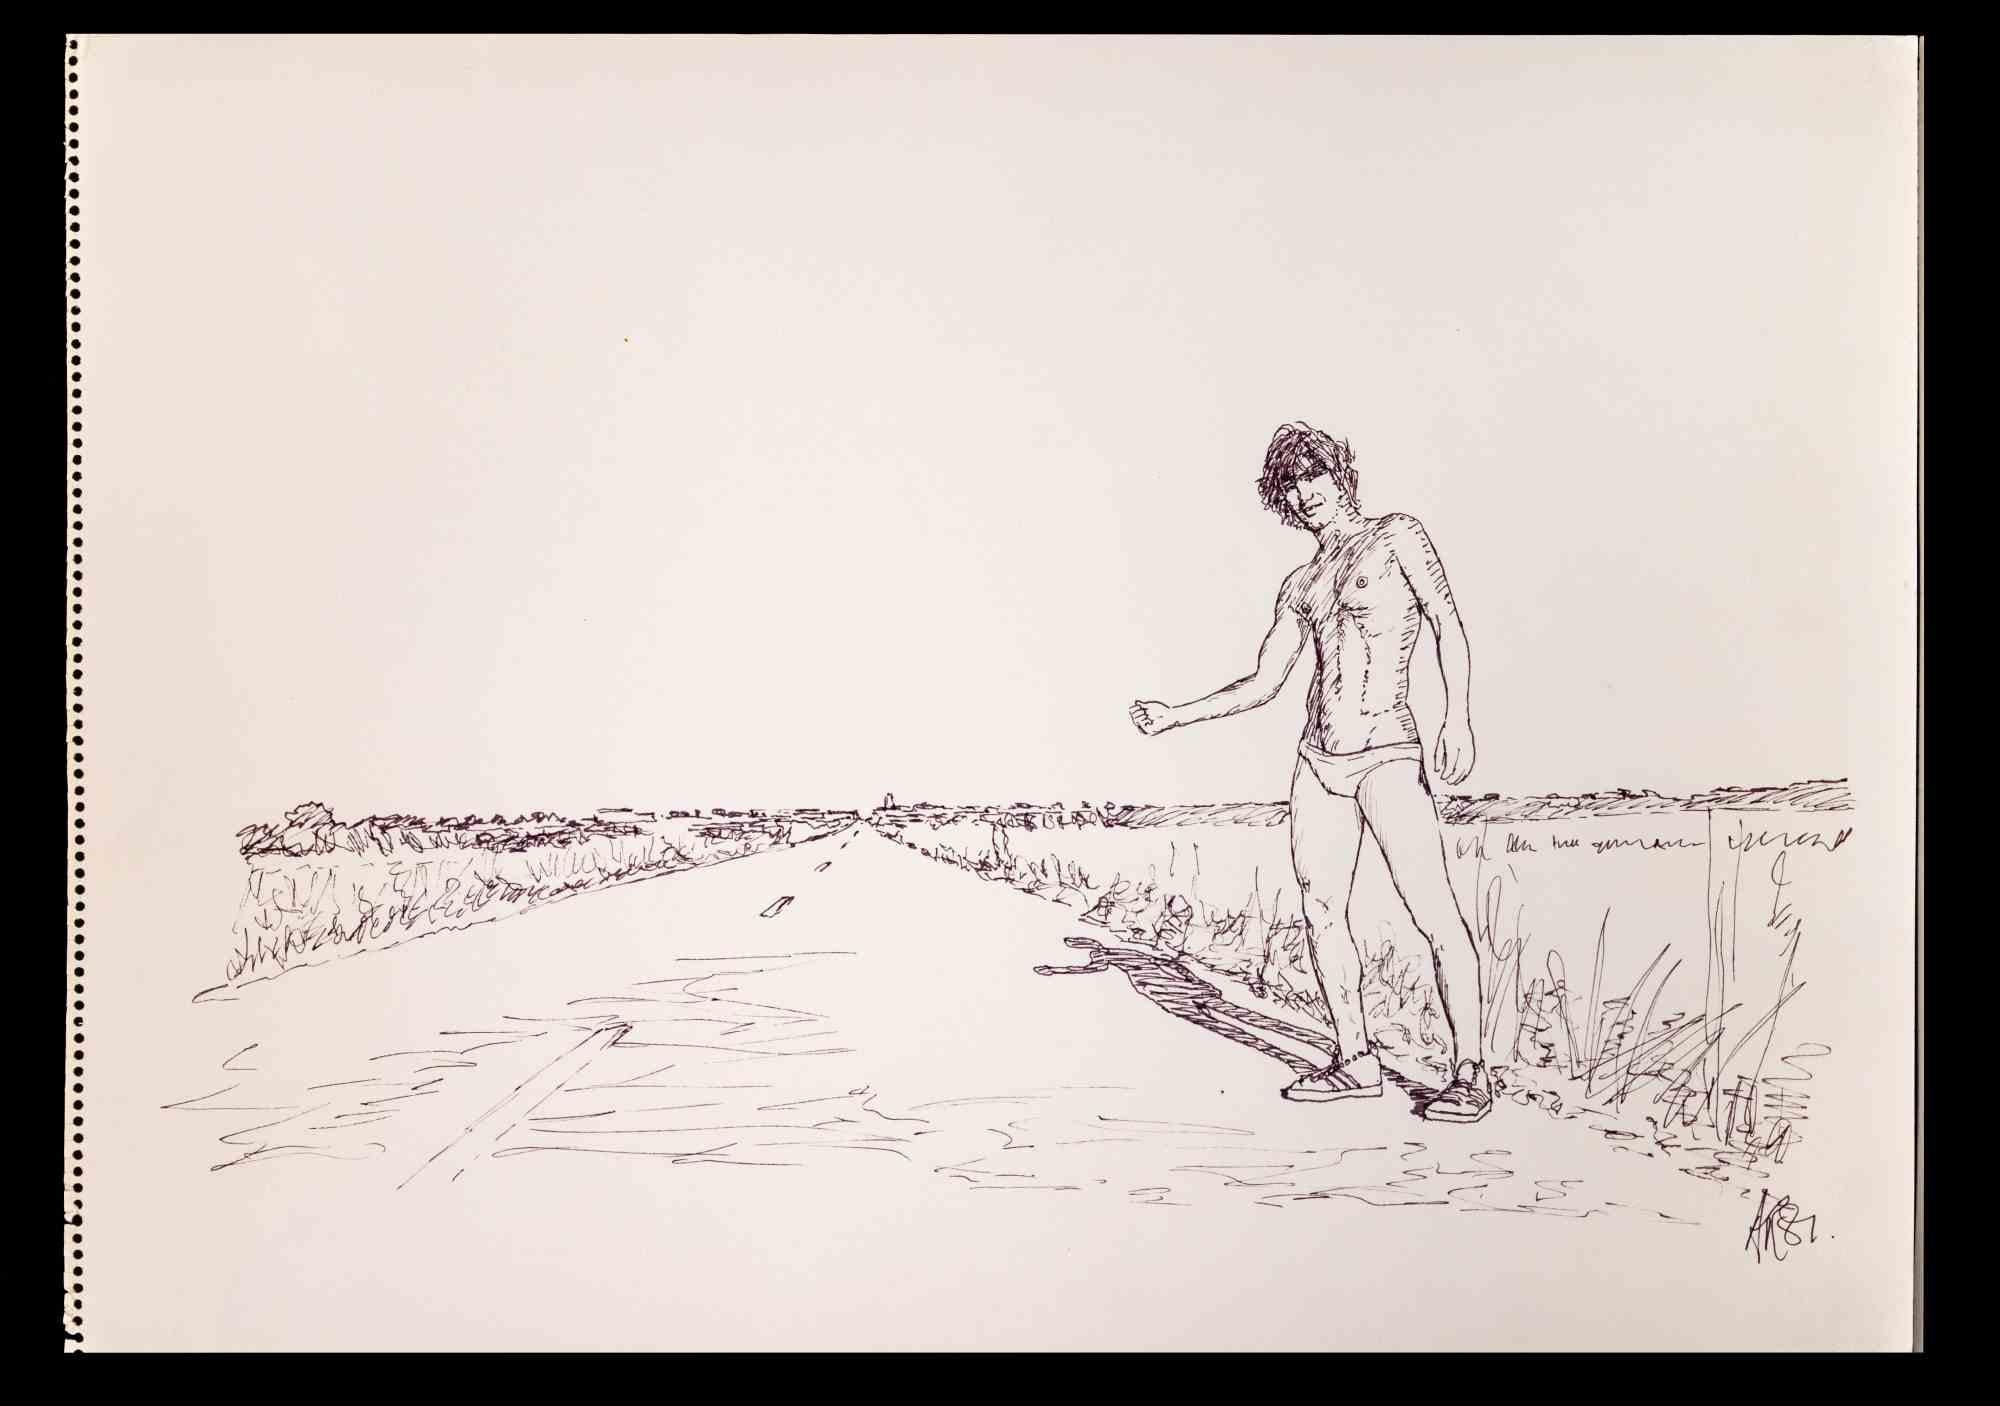 Man on the Road  - Original Drawing by Anthony Roaland - 1981